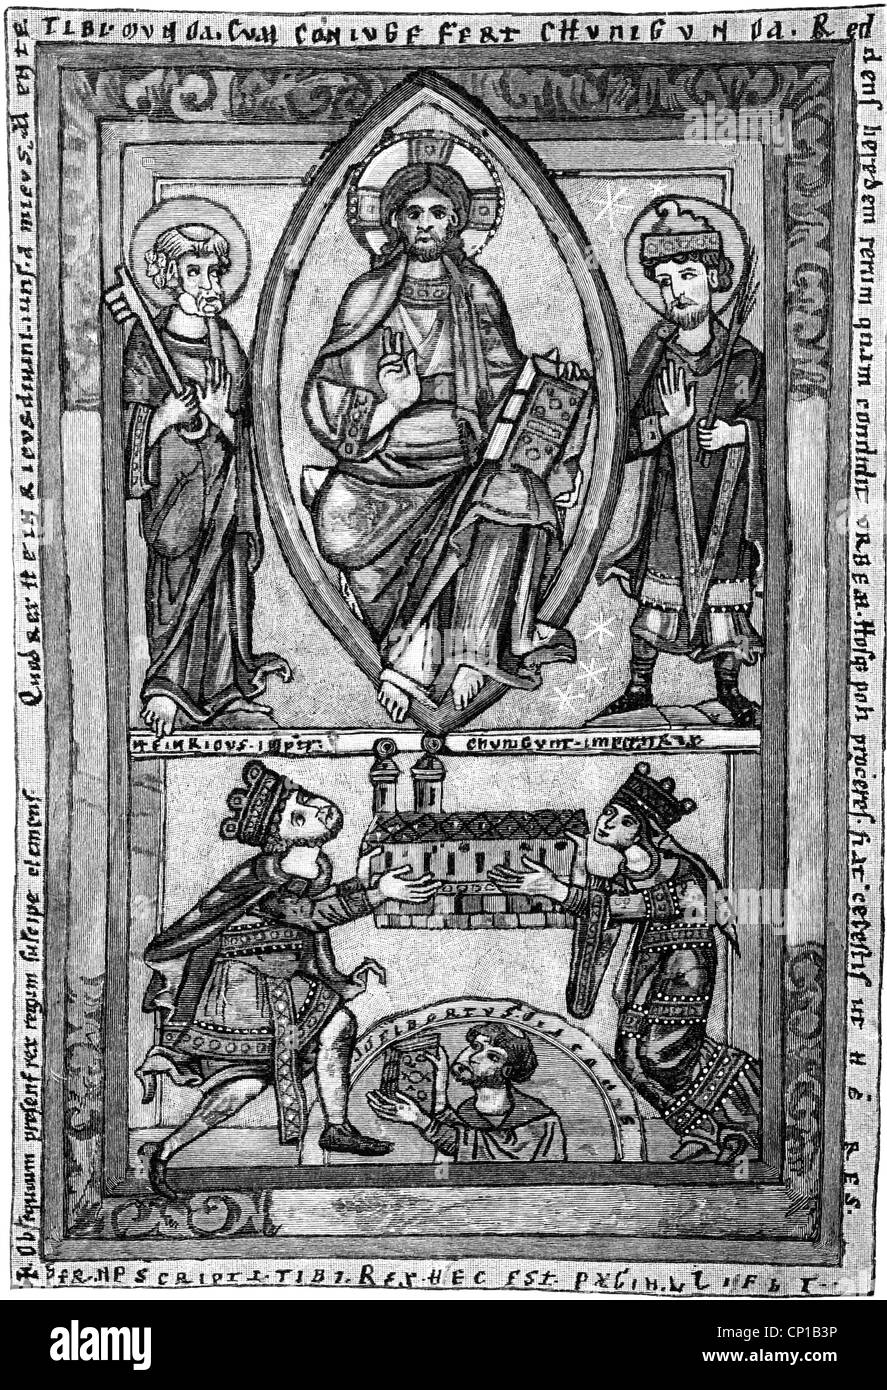 Henry II 'the Saint', 6.5.973 - 13.7.1024, Holy Roman Emperor 14.2.1014 - 13.7.1024, with wife Cunigunde before Jesus Christ, miniature, circa 1150, Bamberg City Library, wood engraving, 19th century, , Stock Photo